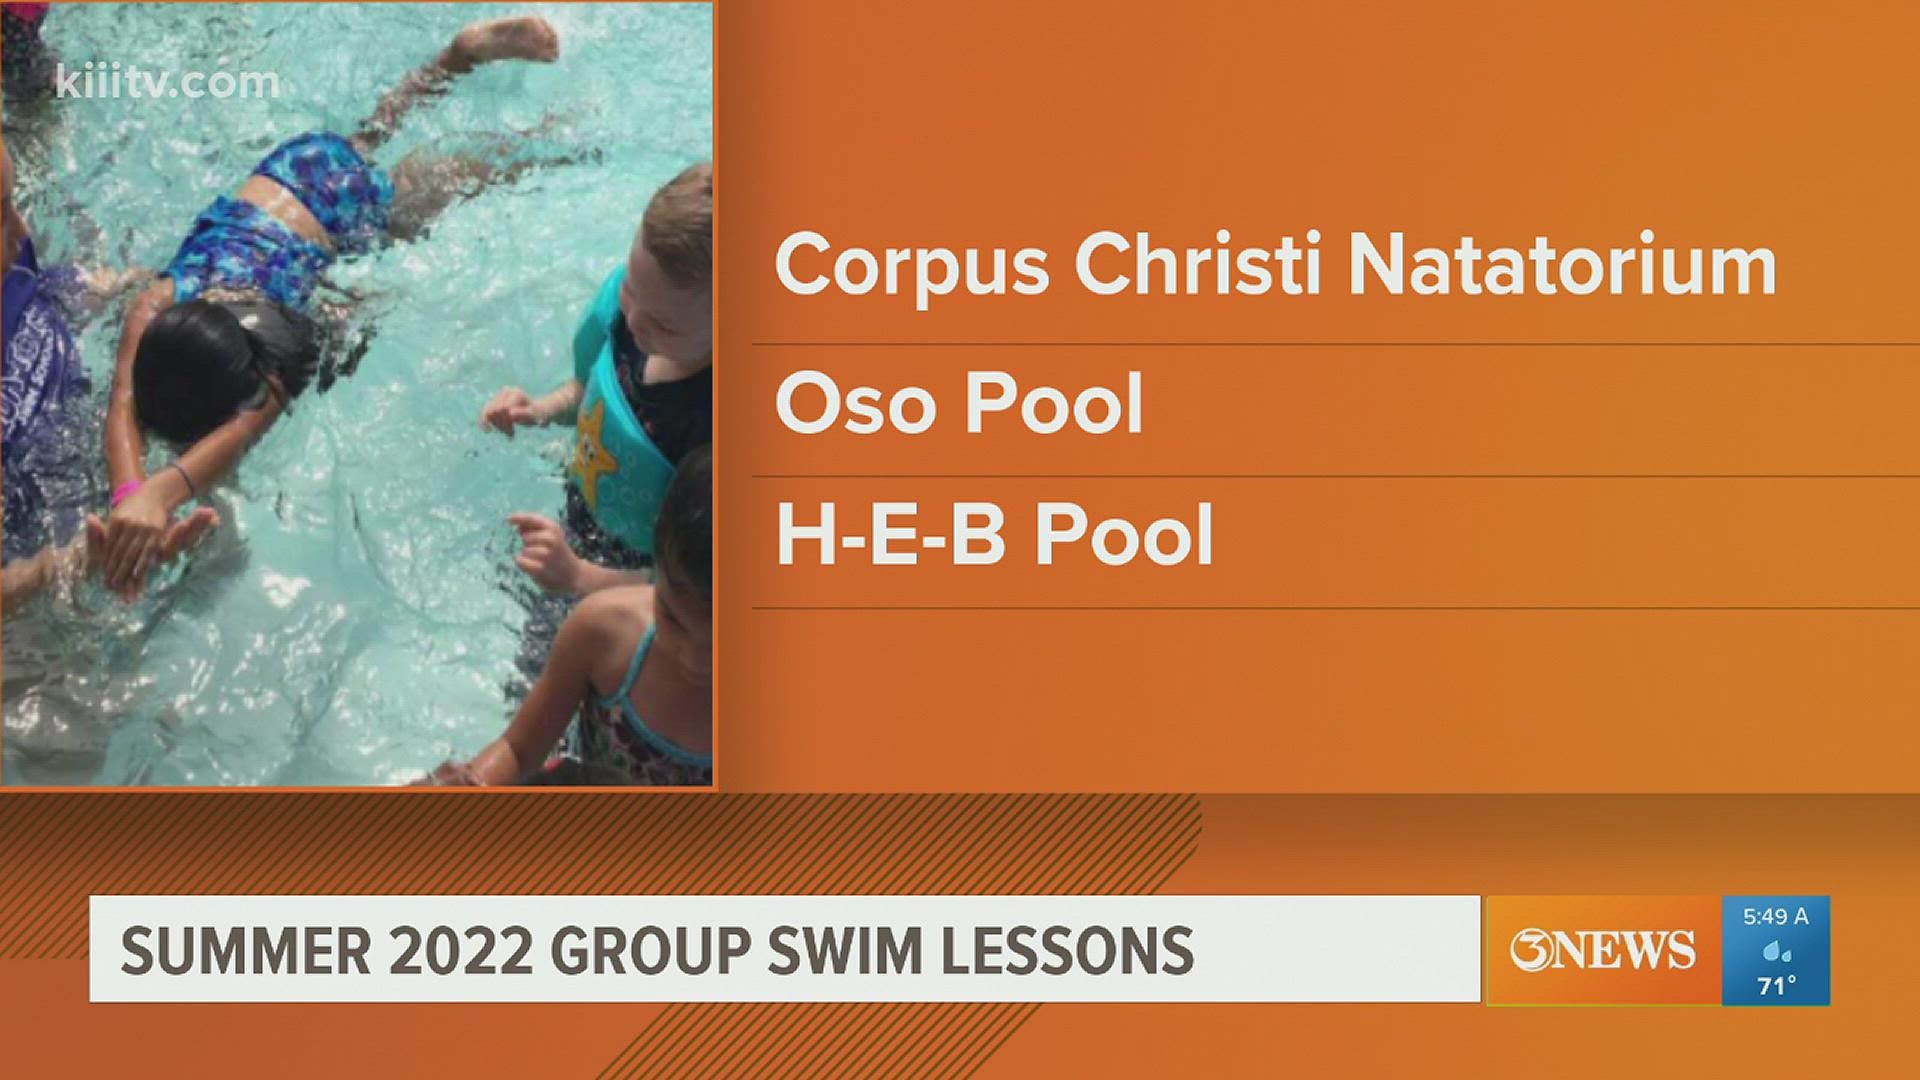 The Corpus Christi Parks & Recreation Department partners with the American Red Cross for the Learn-to-Swim Program.